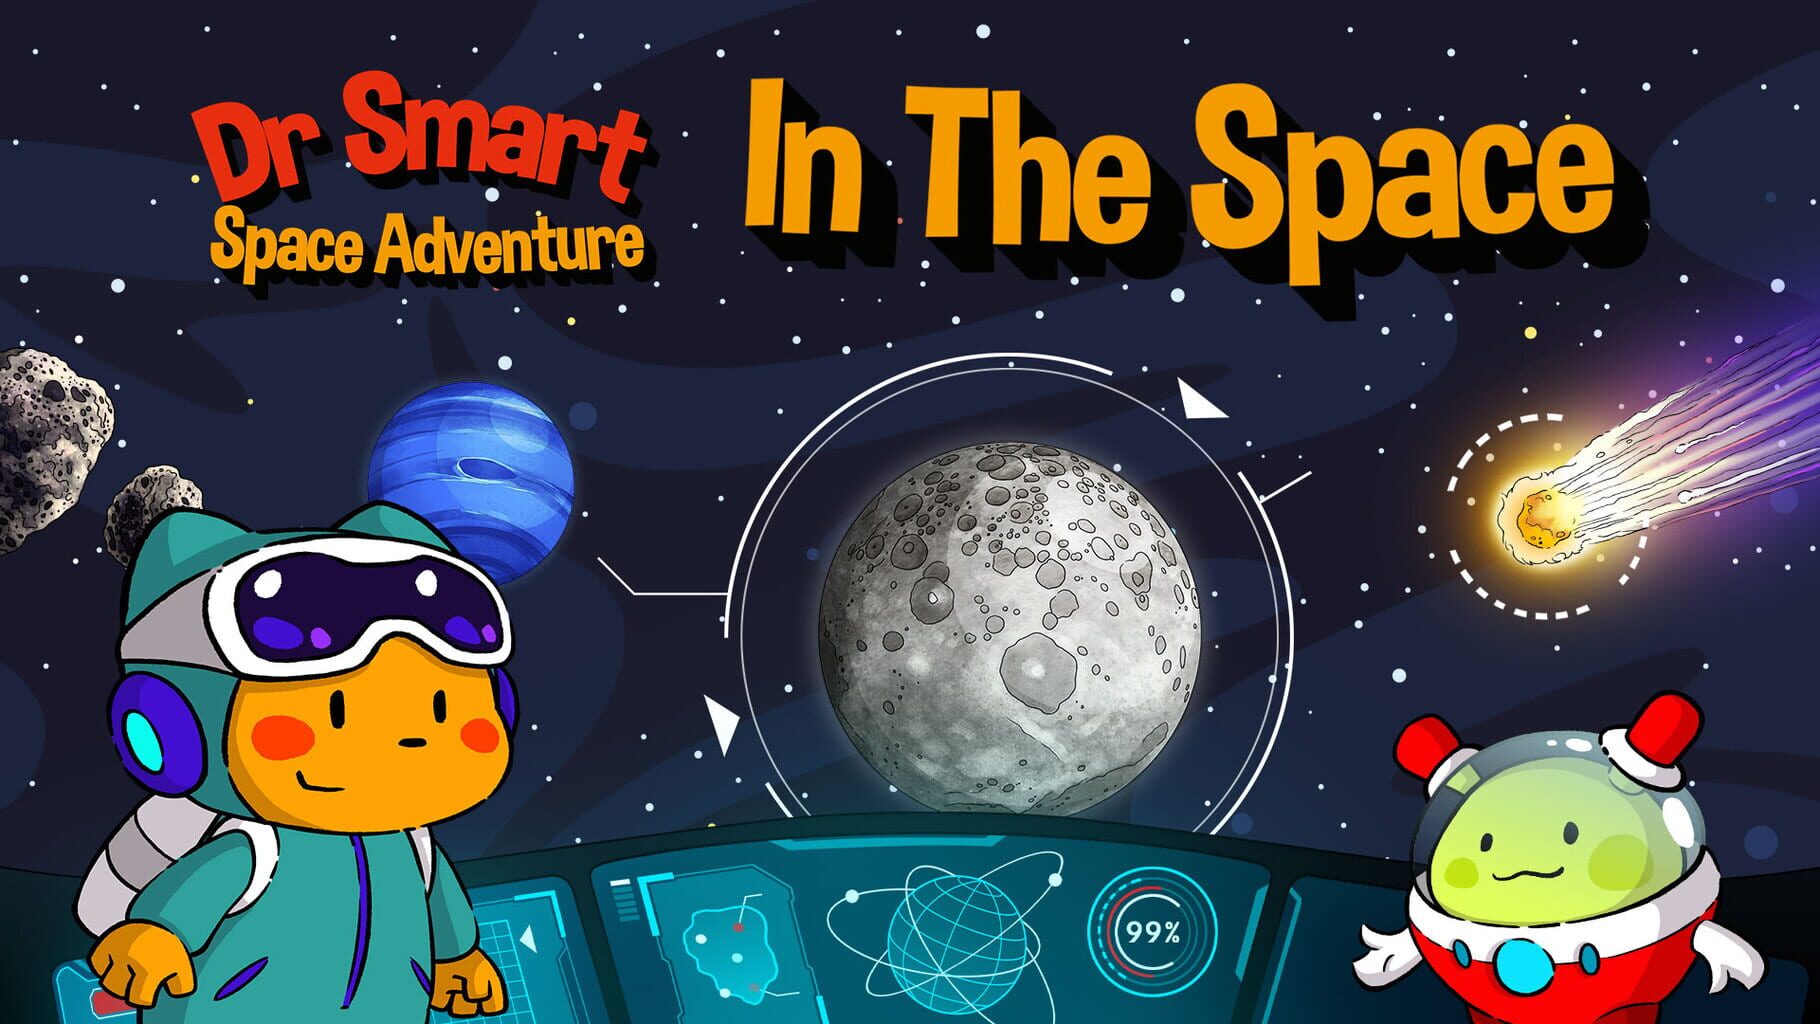 Dr. Smart Space Adventure: In the Space artwork